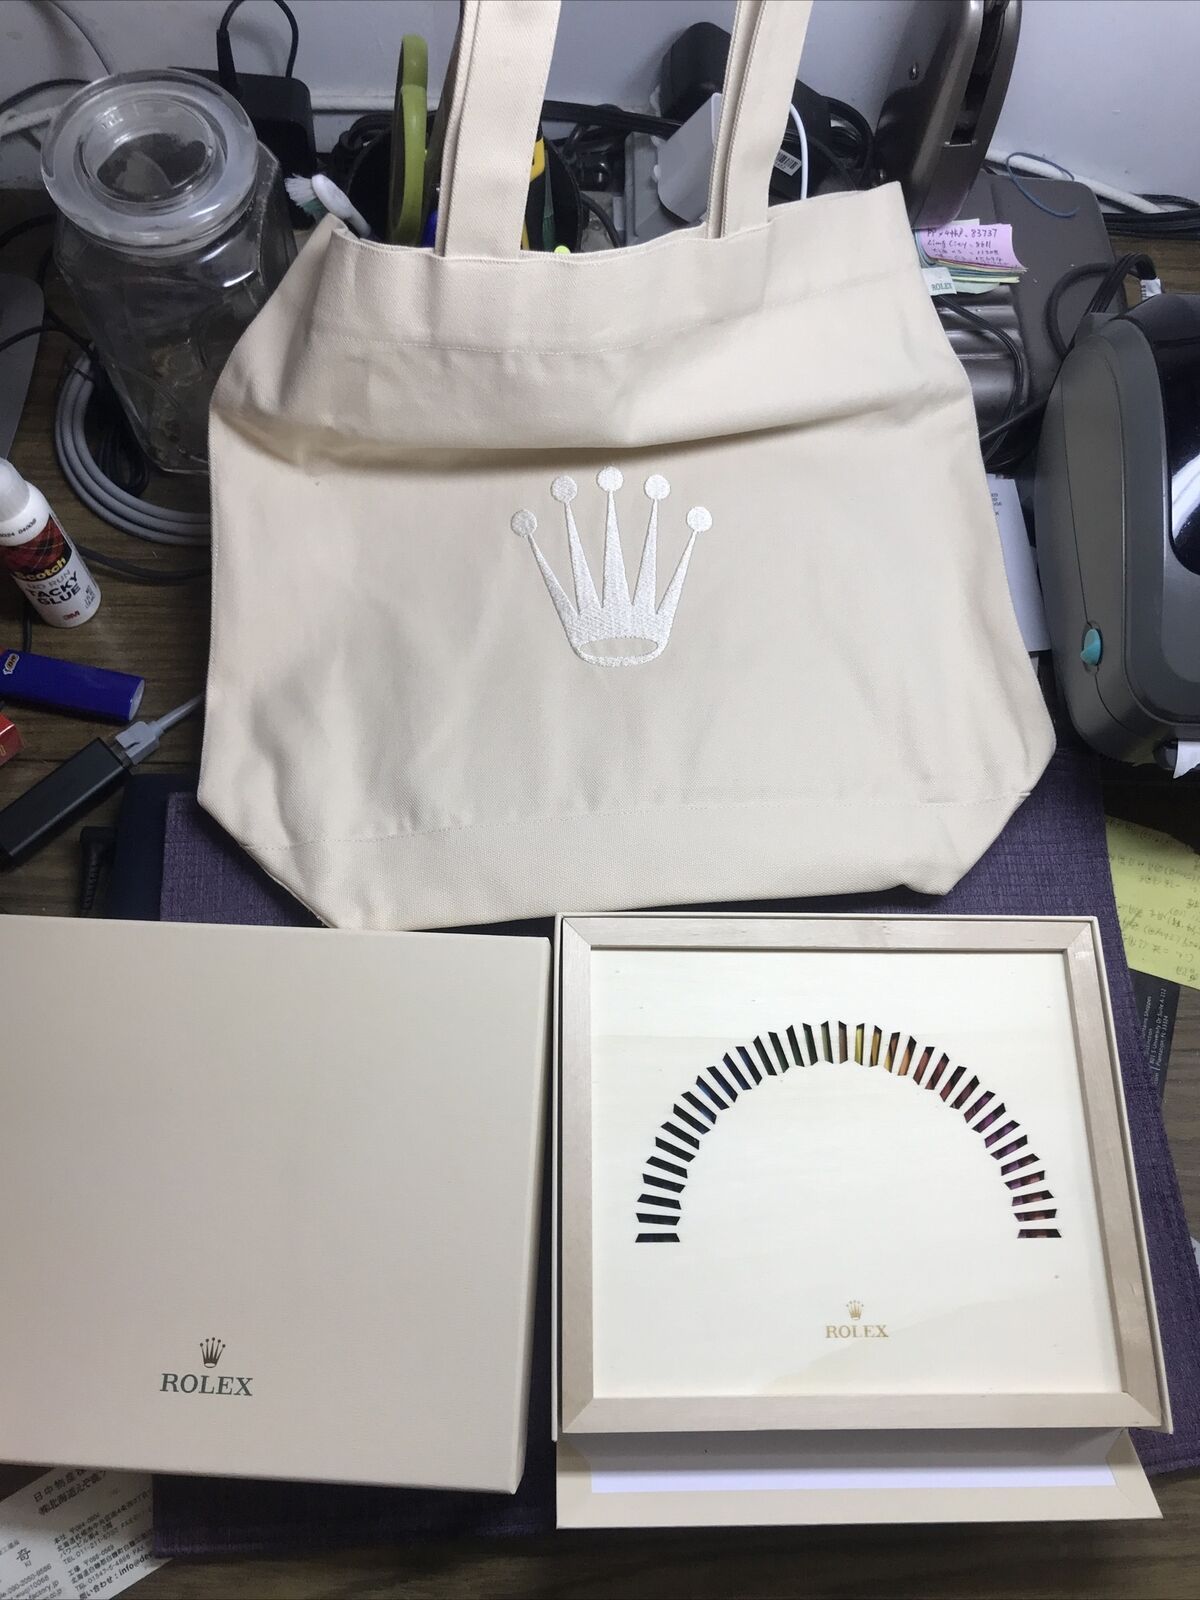 Rolex;CARAN d’ACHE Rainbow Pen Set.2021 “Watch and Miracle”Gift.New in Box;Bag🎁